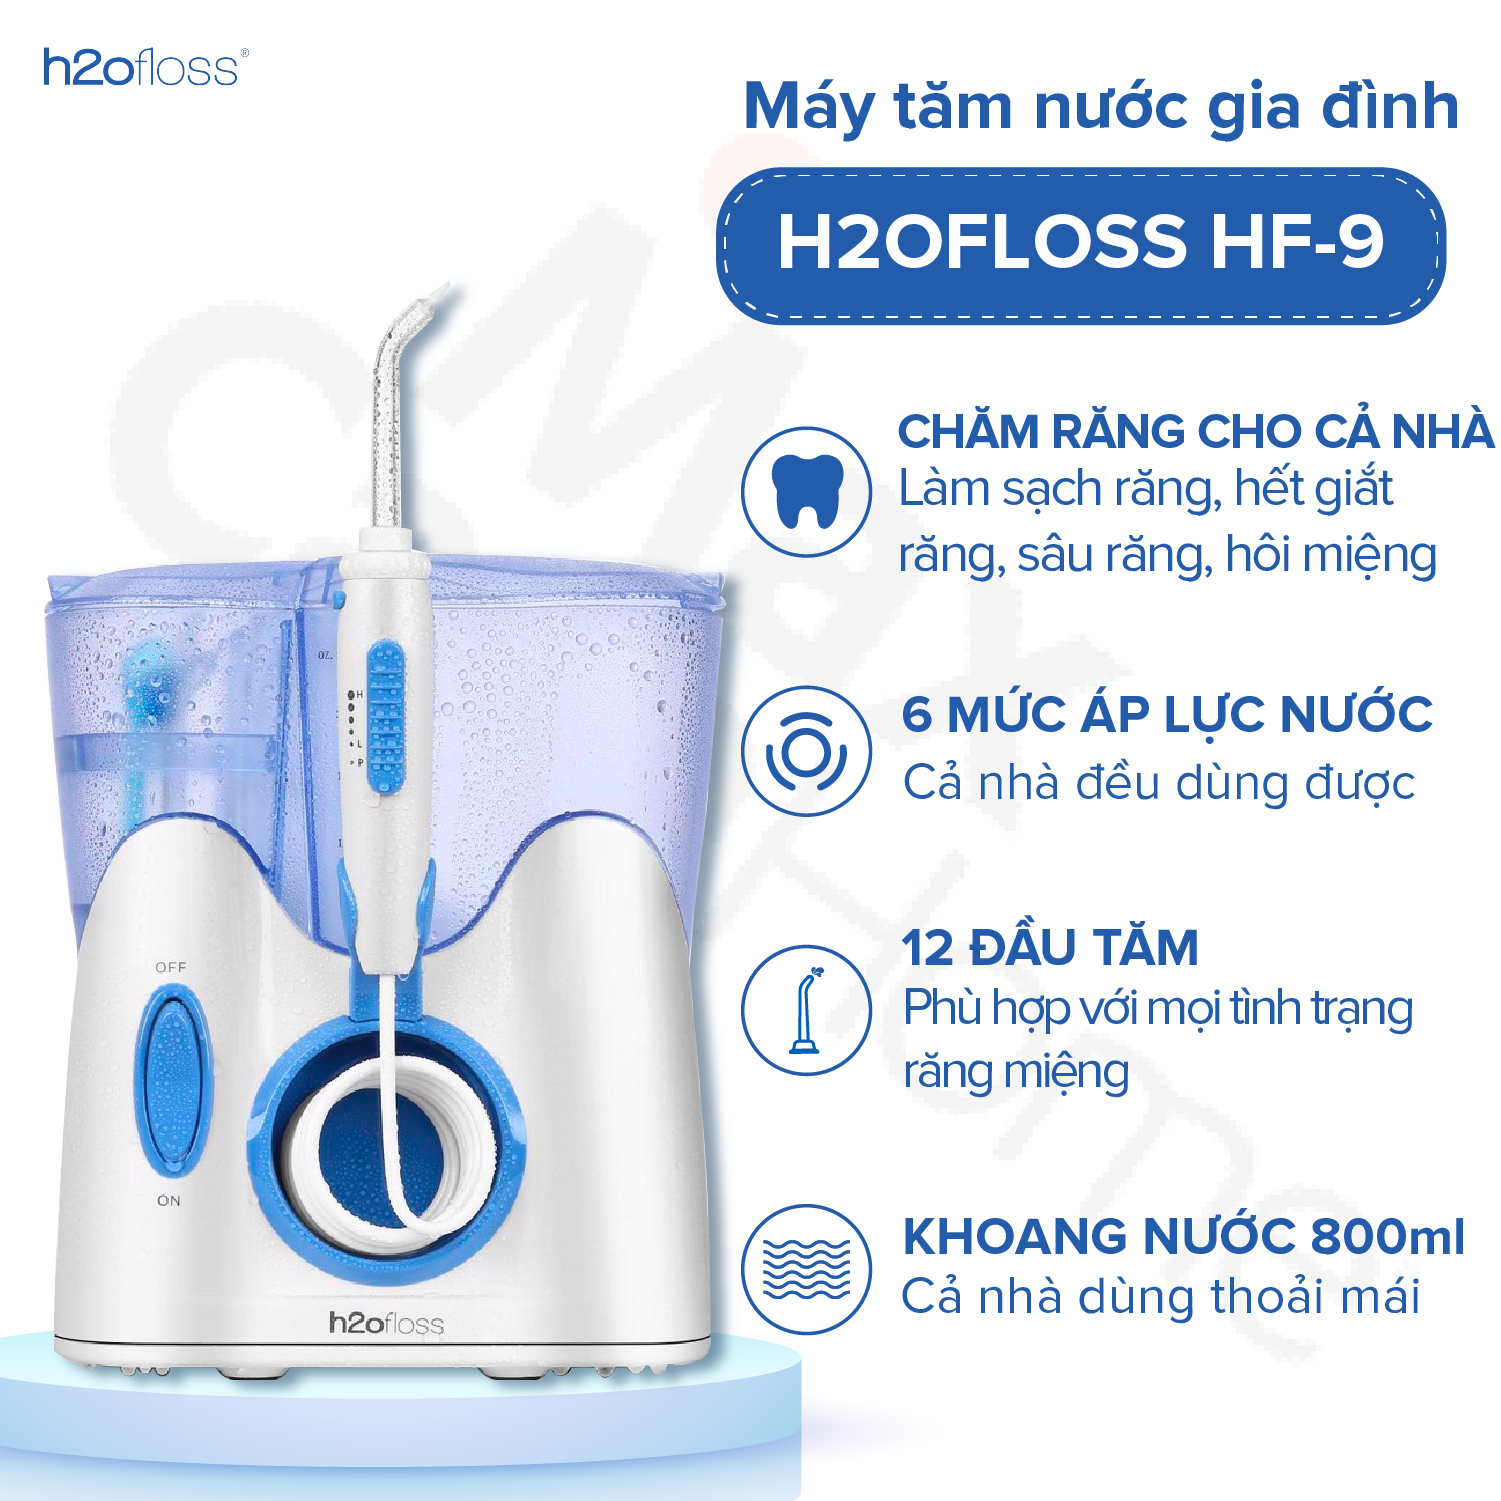 may-tam-nuoc-gia-dinh-h2ofloss